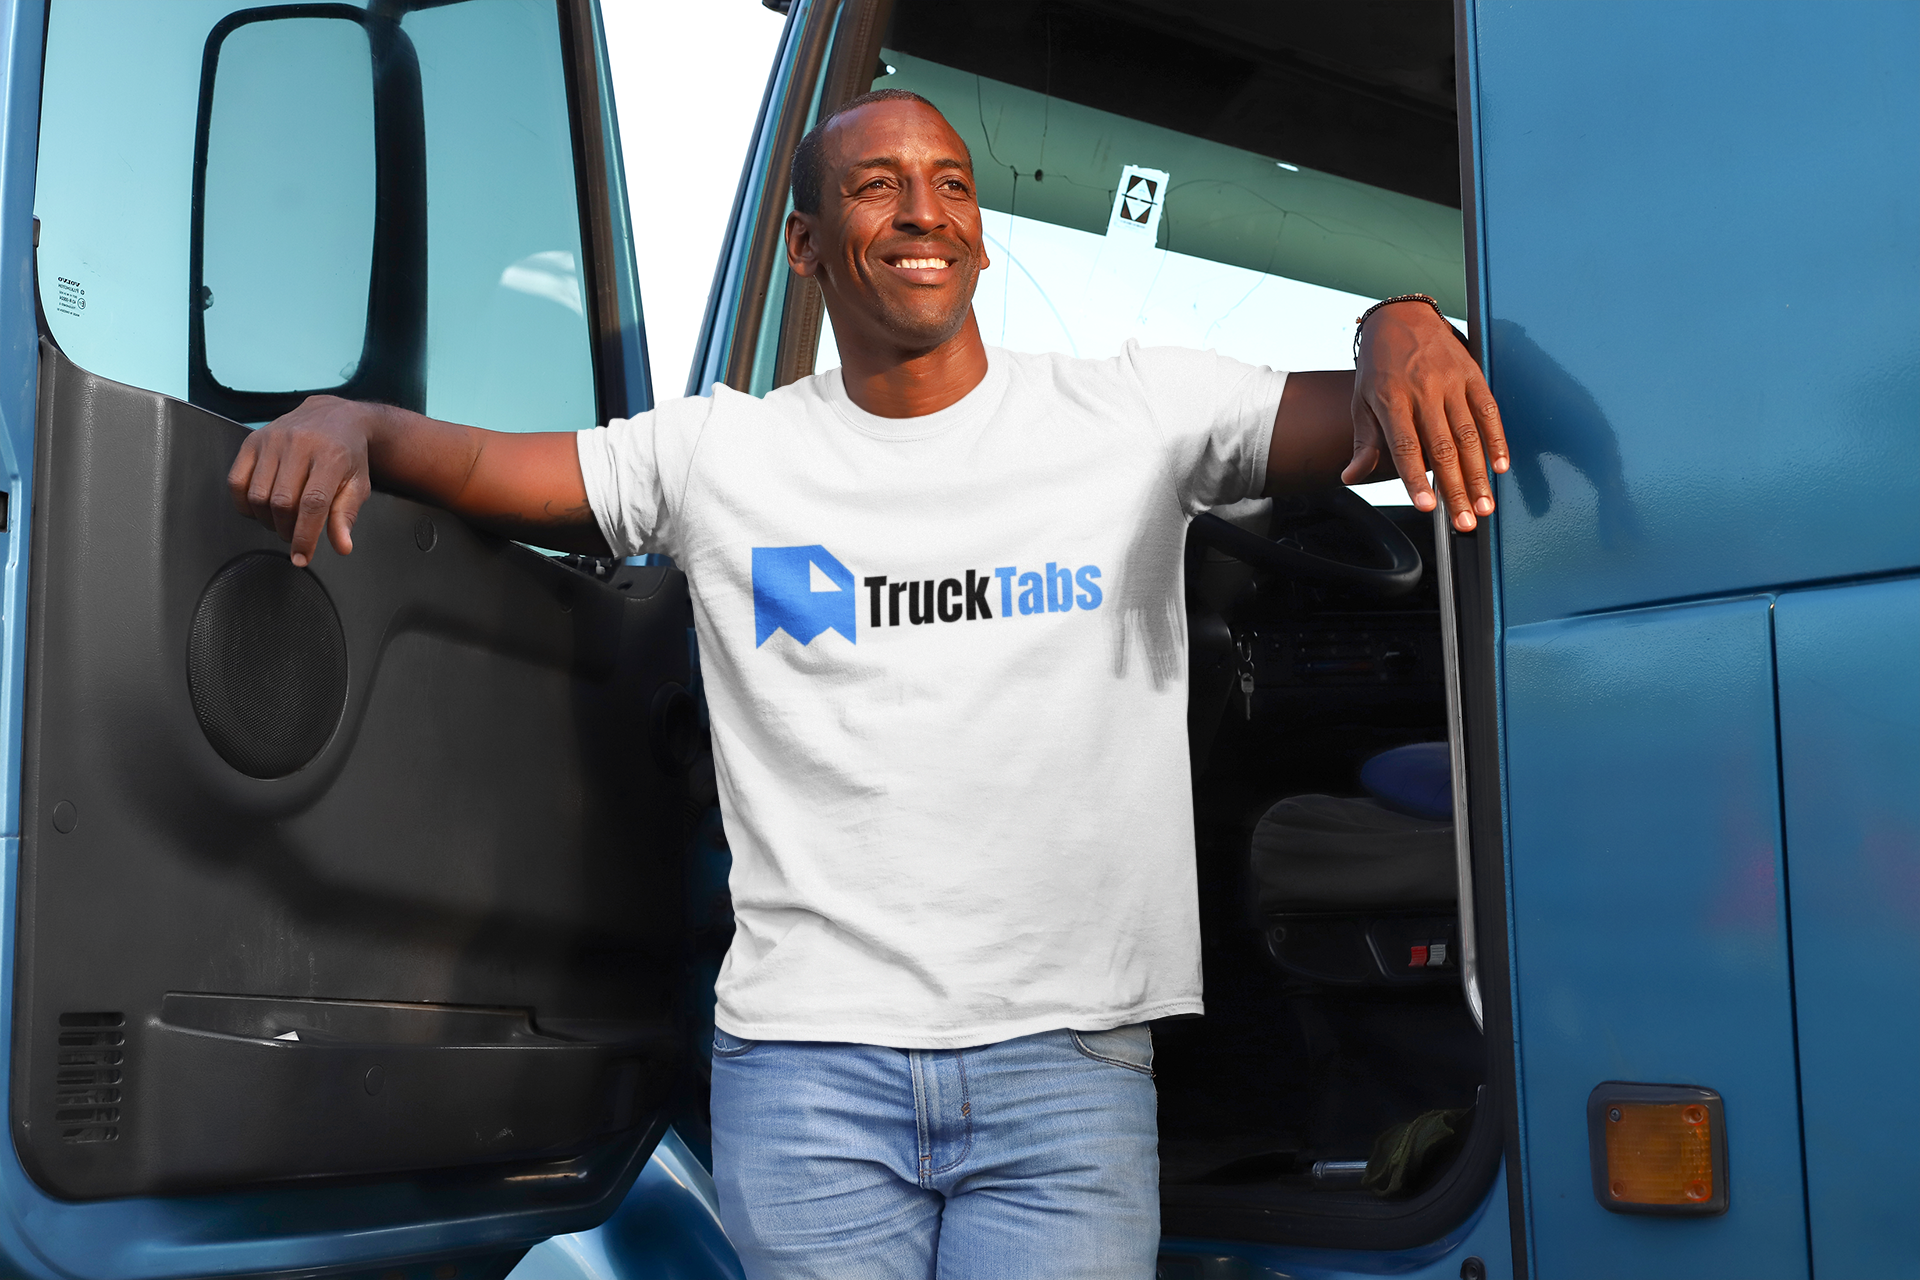 Driver with TruckTabs T-shirt